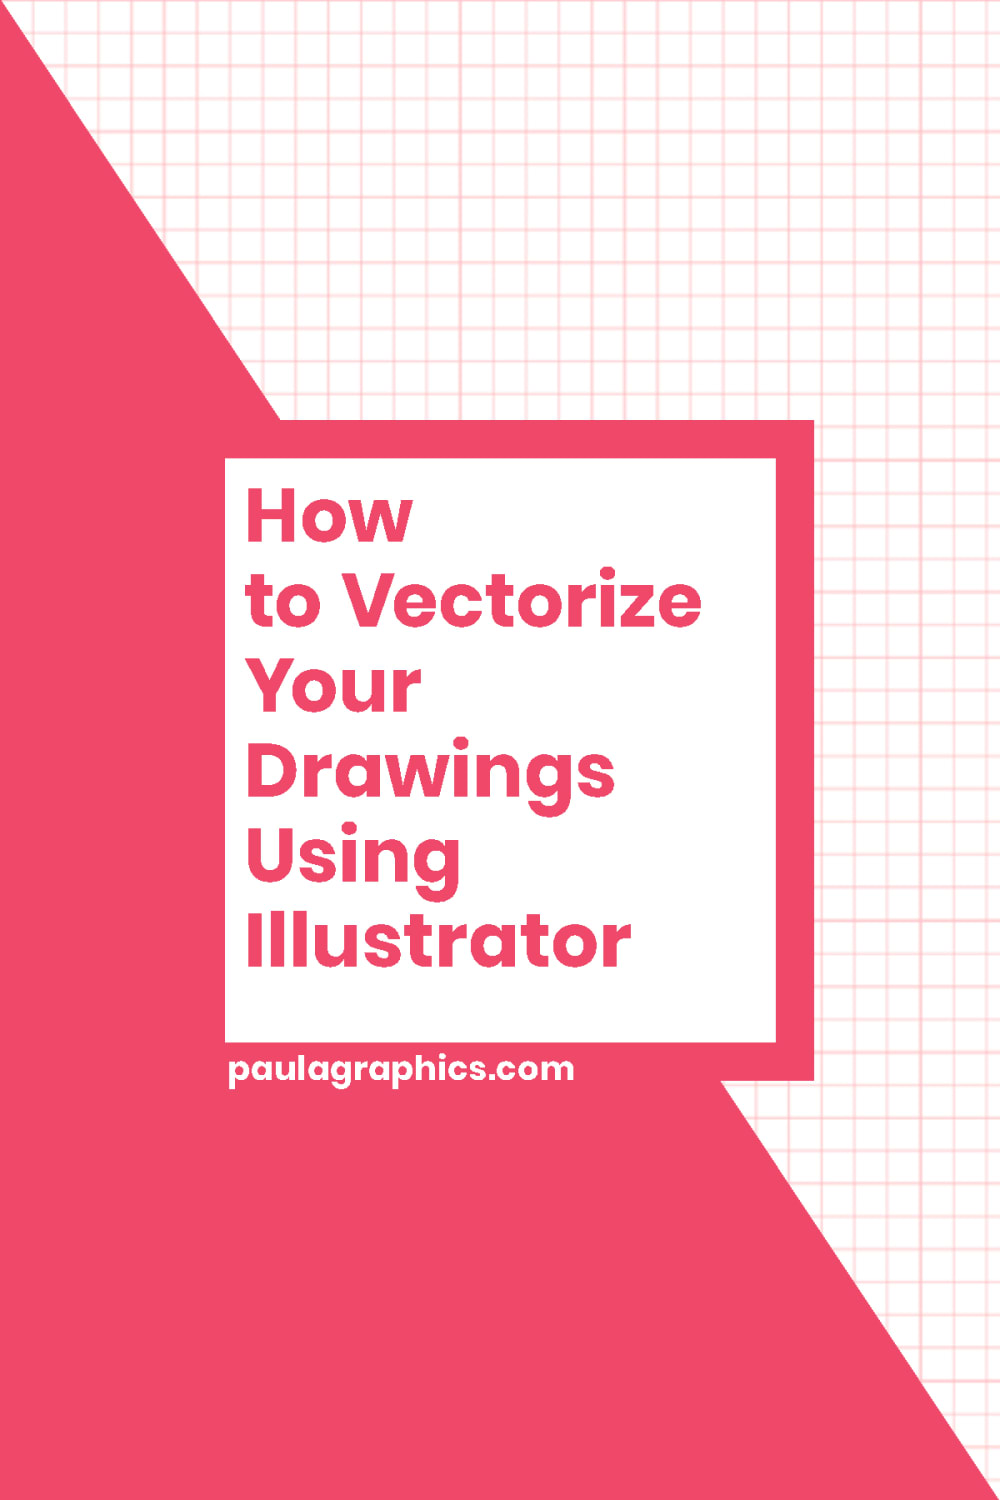 How to Vectorize Your Drawings Using Illustrator